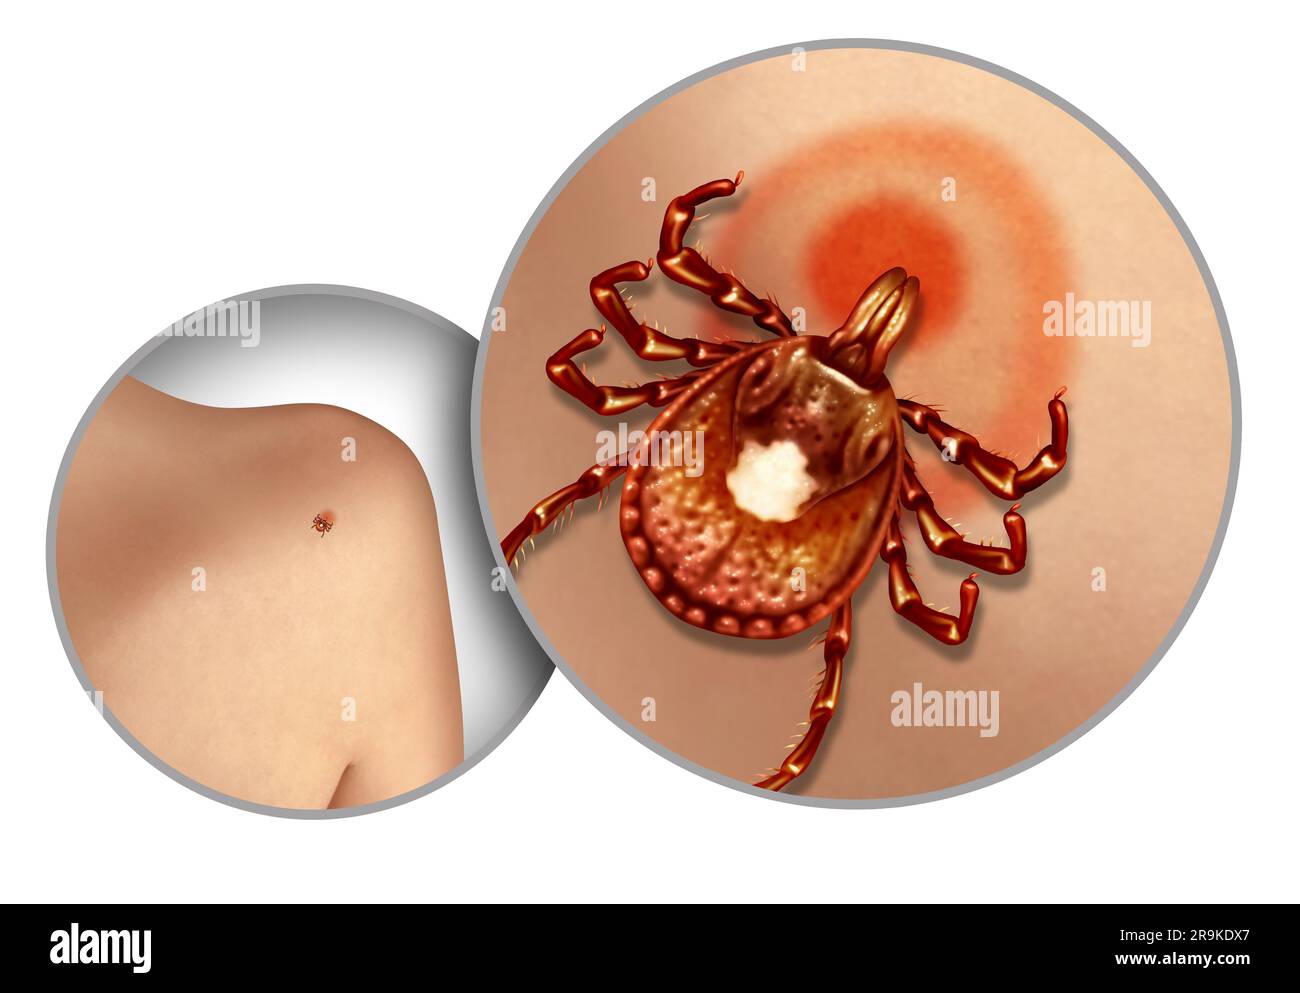 Lone Star Tick on the skin as a disease and infectious ticks spreading infection as a health danger with a bite of a parasite causing infections Stock Photo